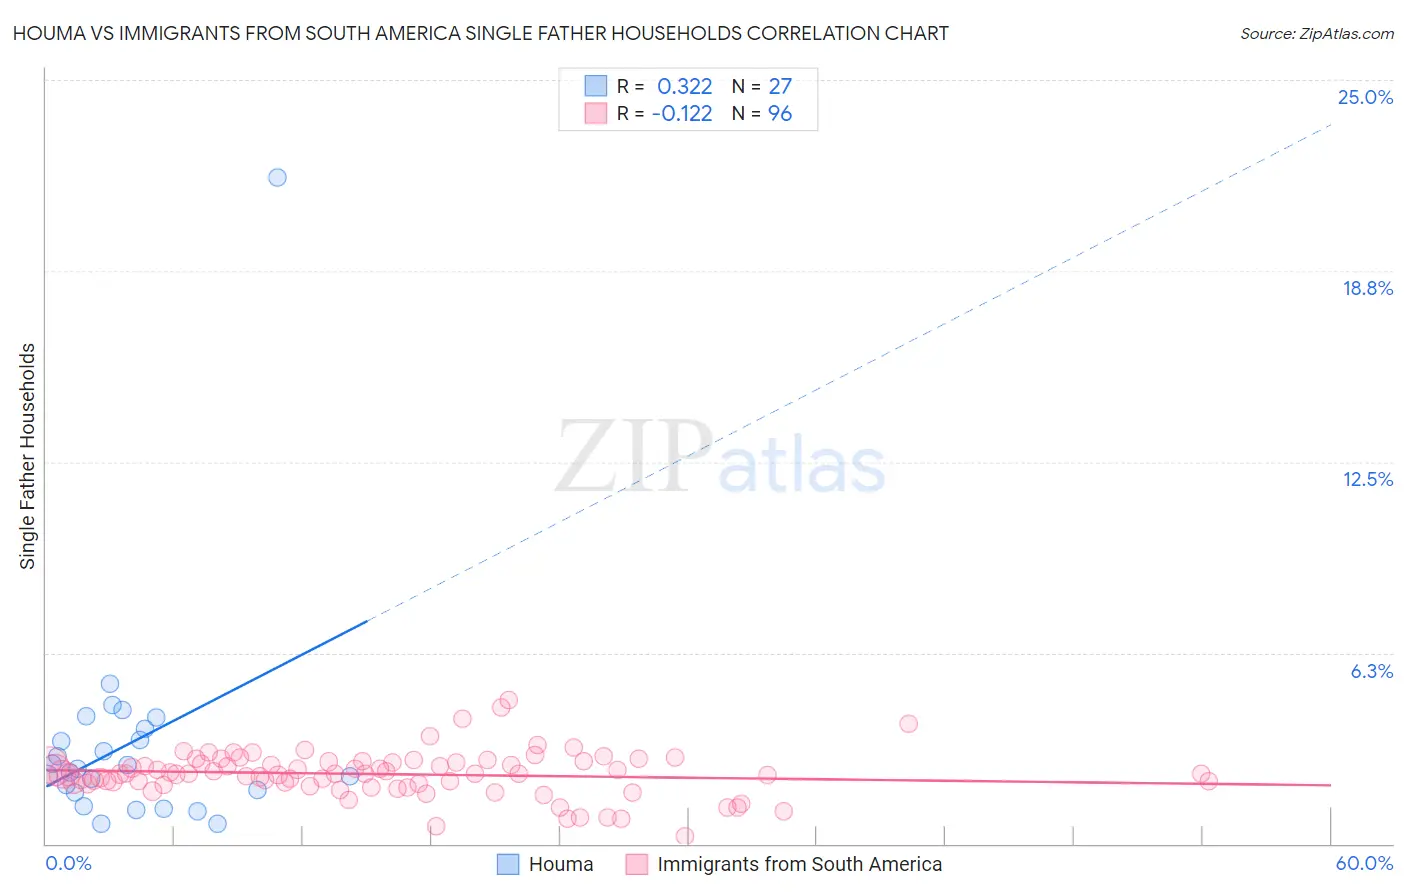 Houma vs Immigrants from South America Single Father Households